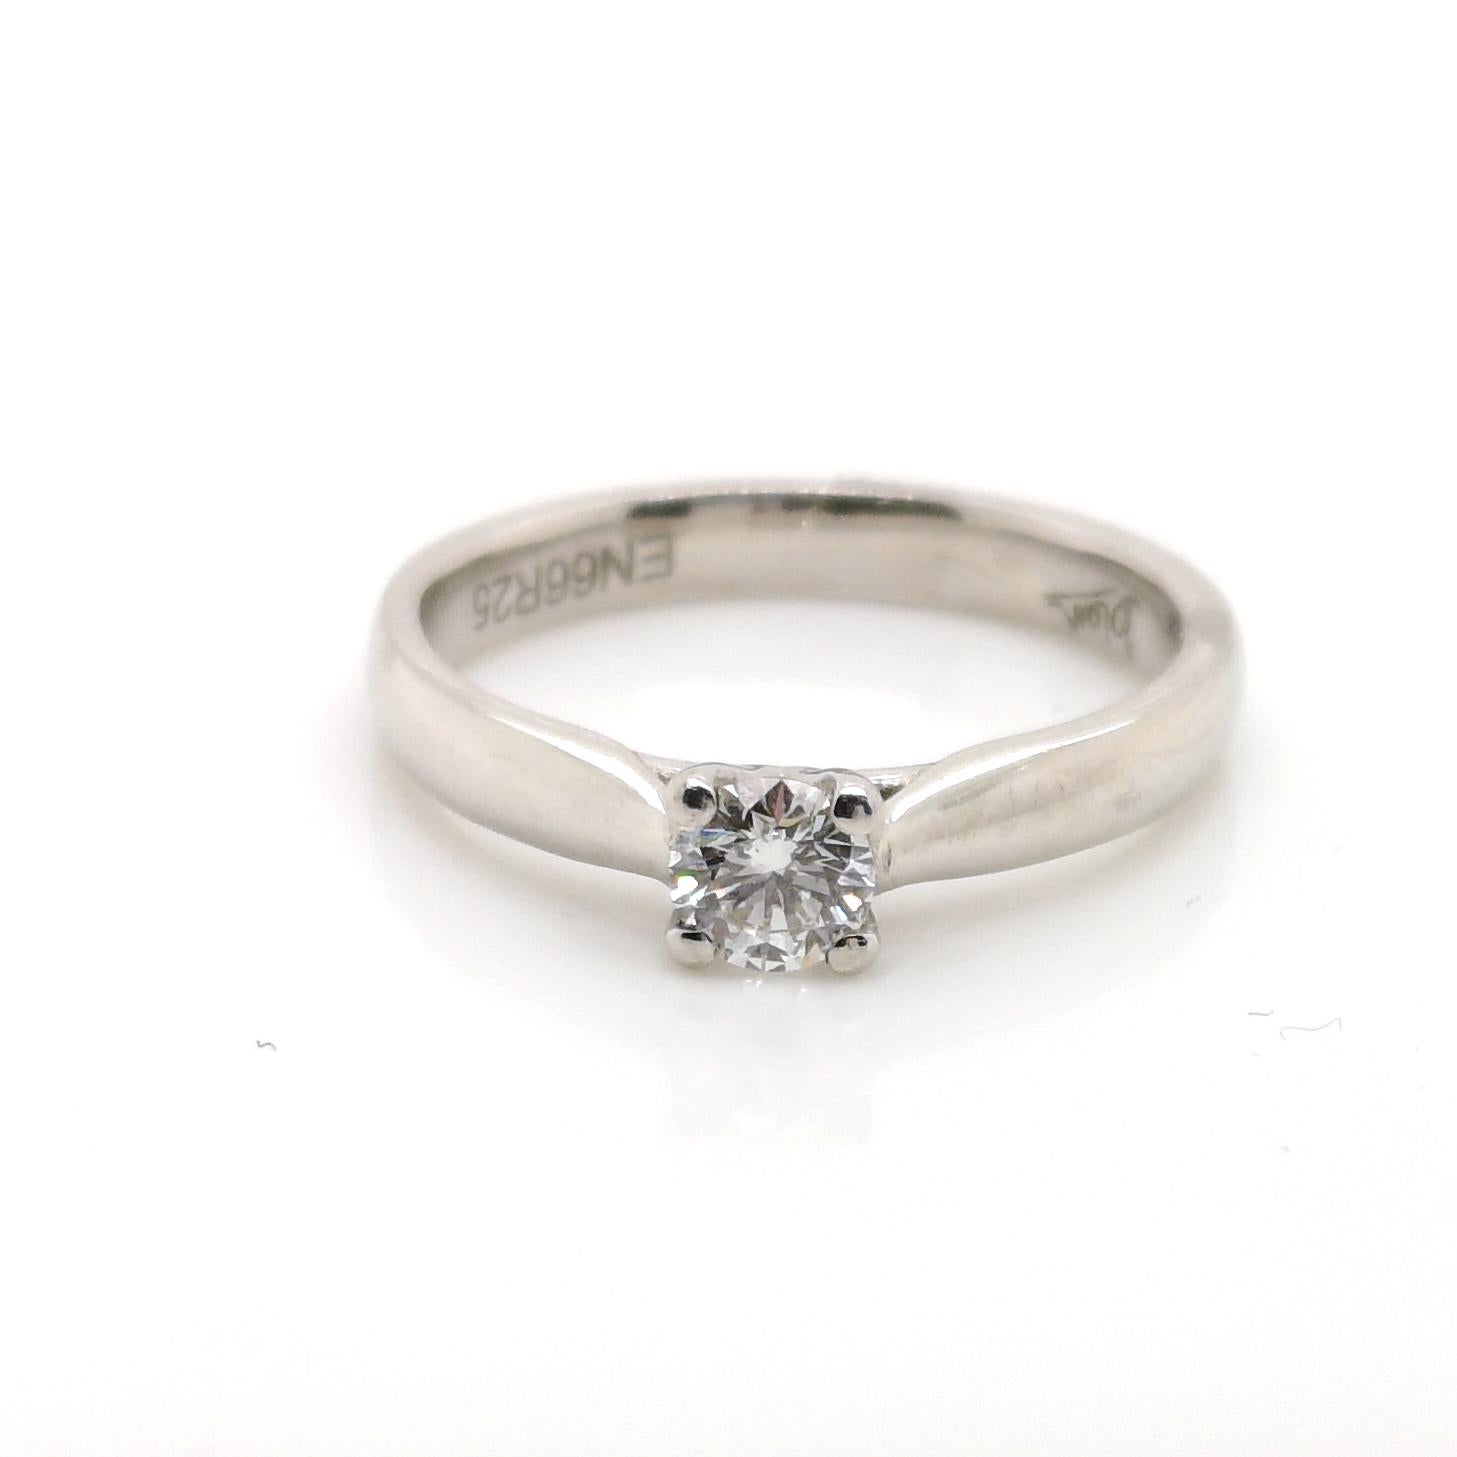 A diamond engagement ring, single stone, round brilliant-cut diamond, weighing 0.25ct, in a ffour claw setting, with a 2.5mm wide tapering shank, mounted in platinum.